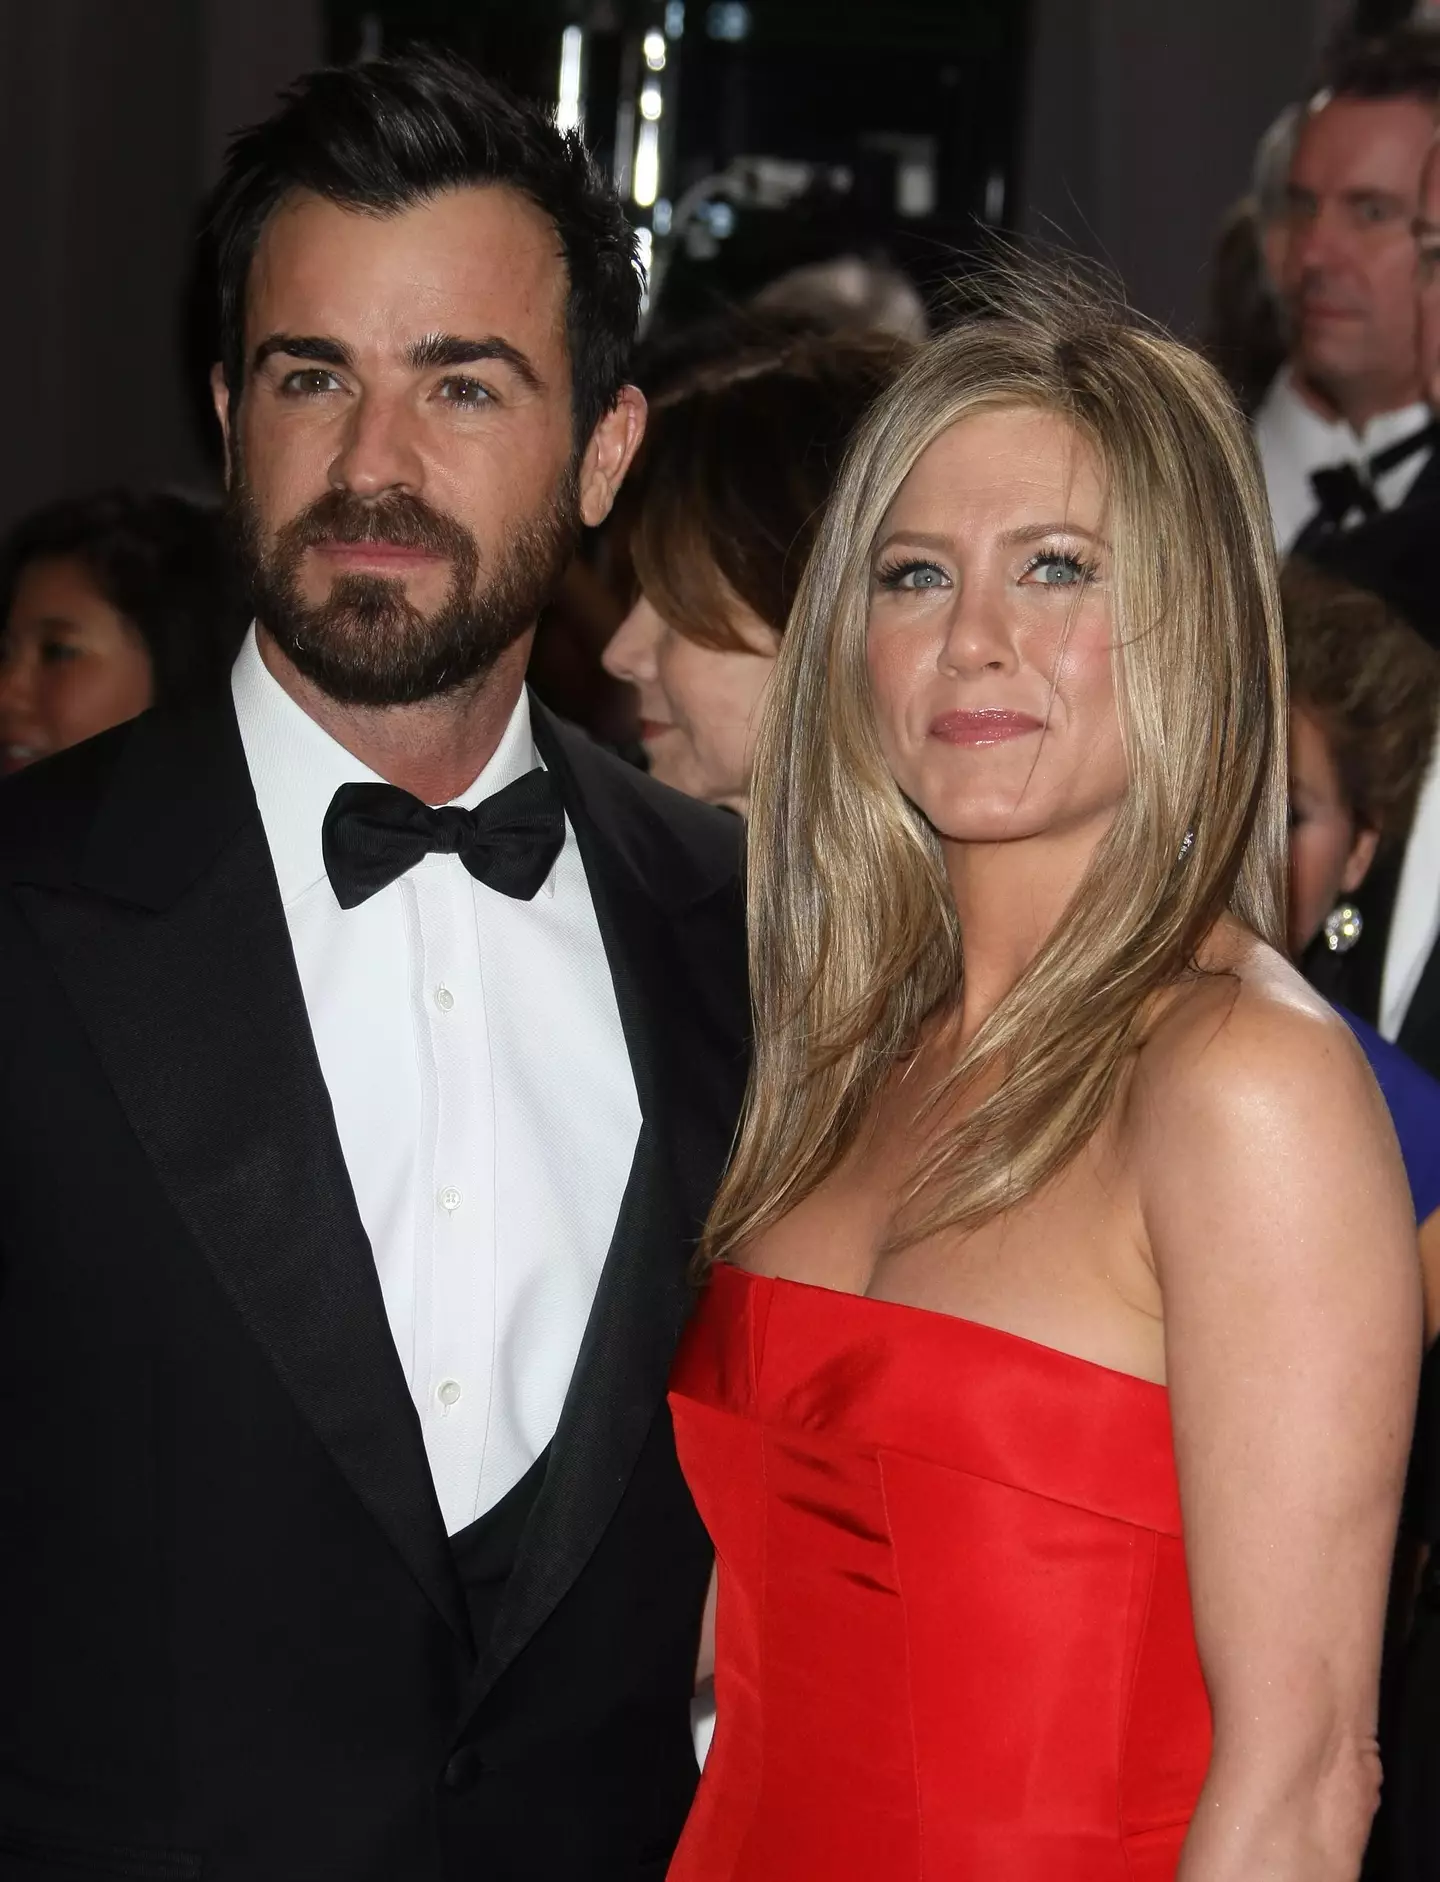 Jennifer Aniston and Justin Theroux divorced in 2018.